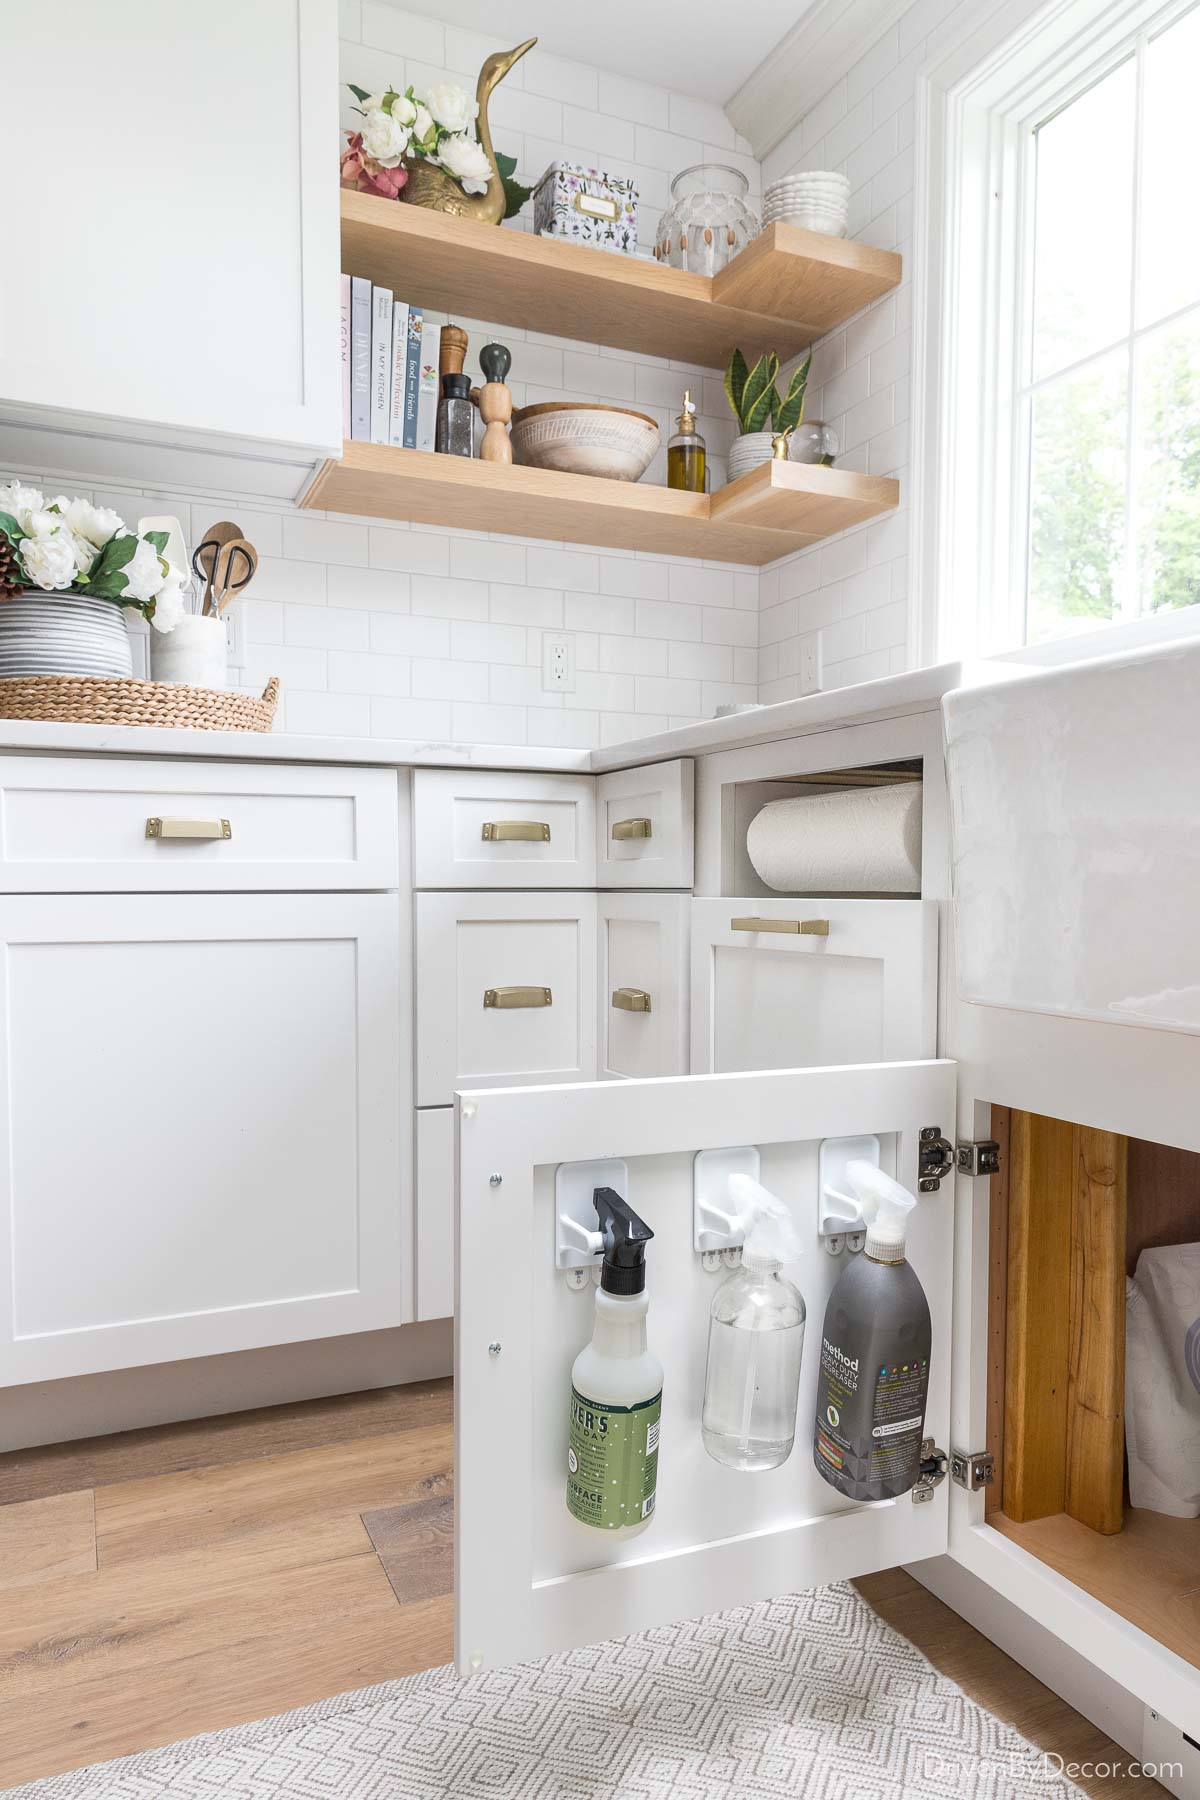 Hang spray bottles on the inside of your bathroom cabinets as a smart way to store them where they're easy to grab!